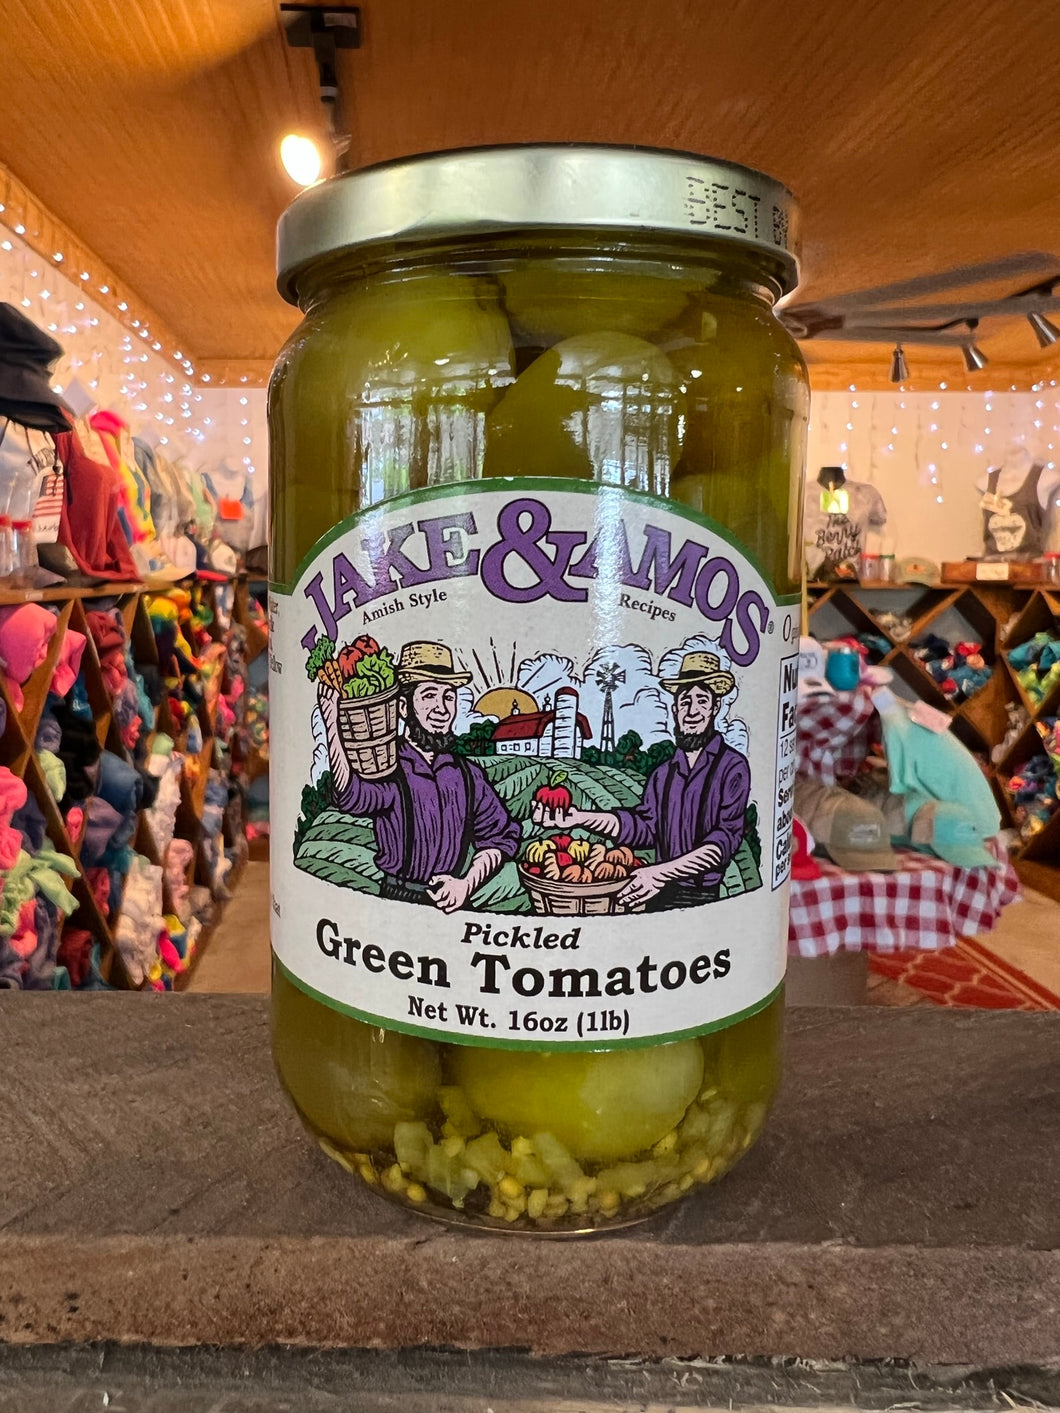 Jake and Amos Pickled Green Tomatoes